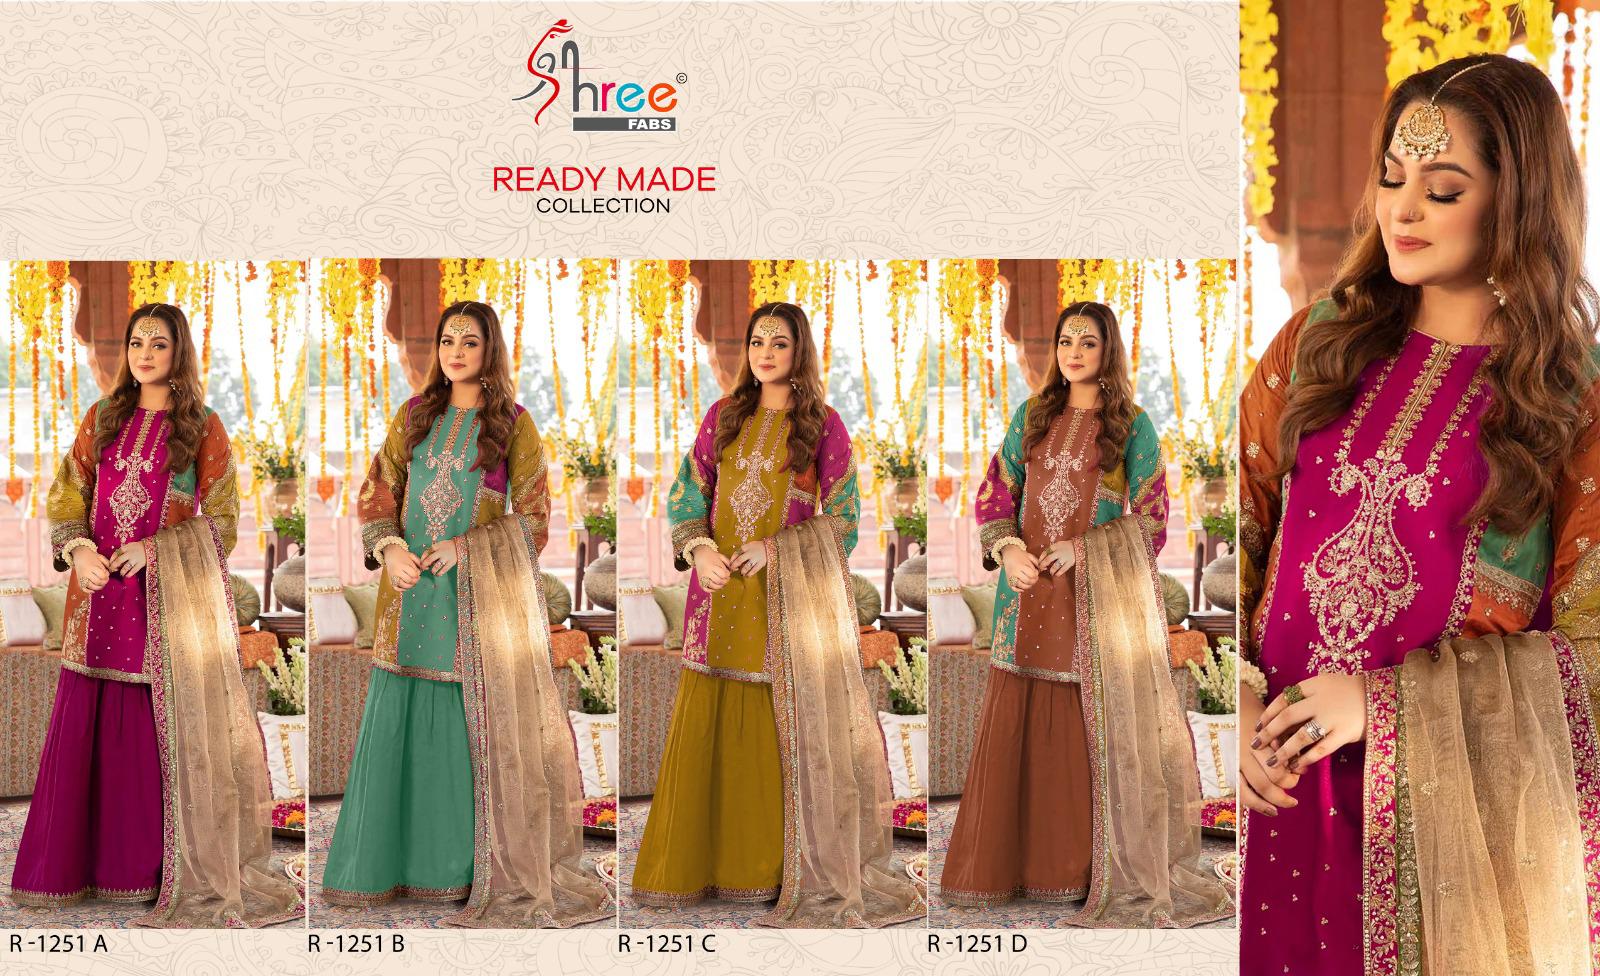 SHREE FAB READY MADE COLLECTION R-1251-A TO R-1251-D